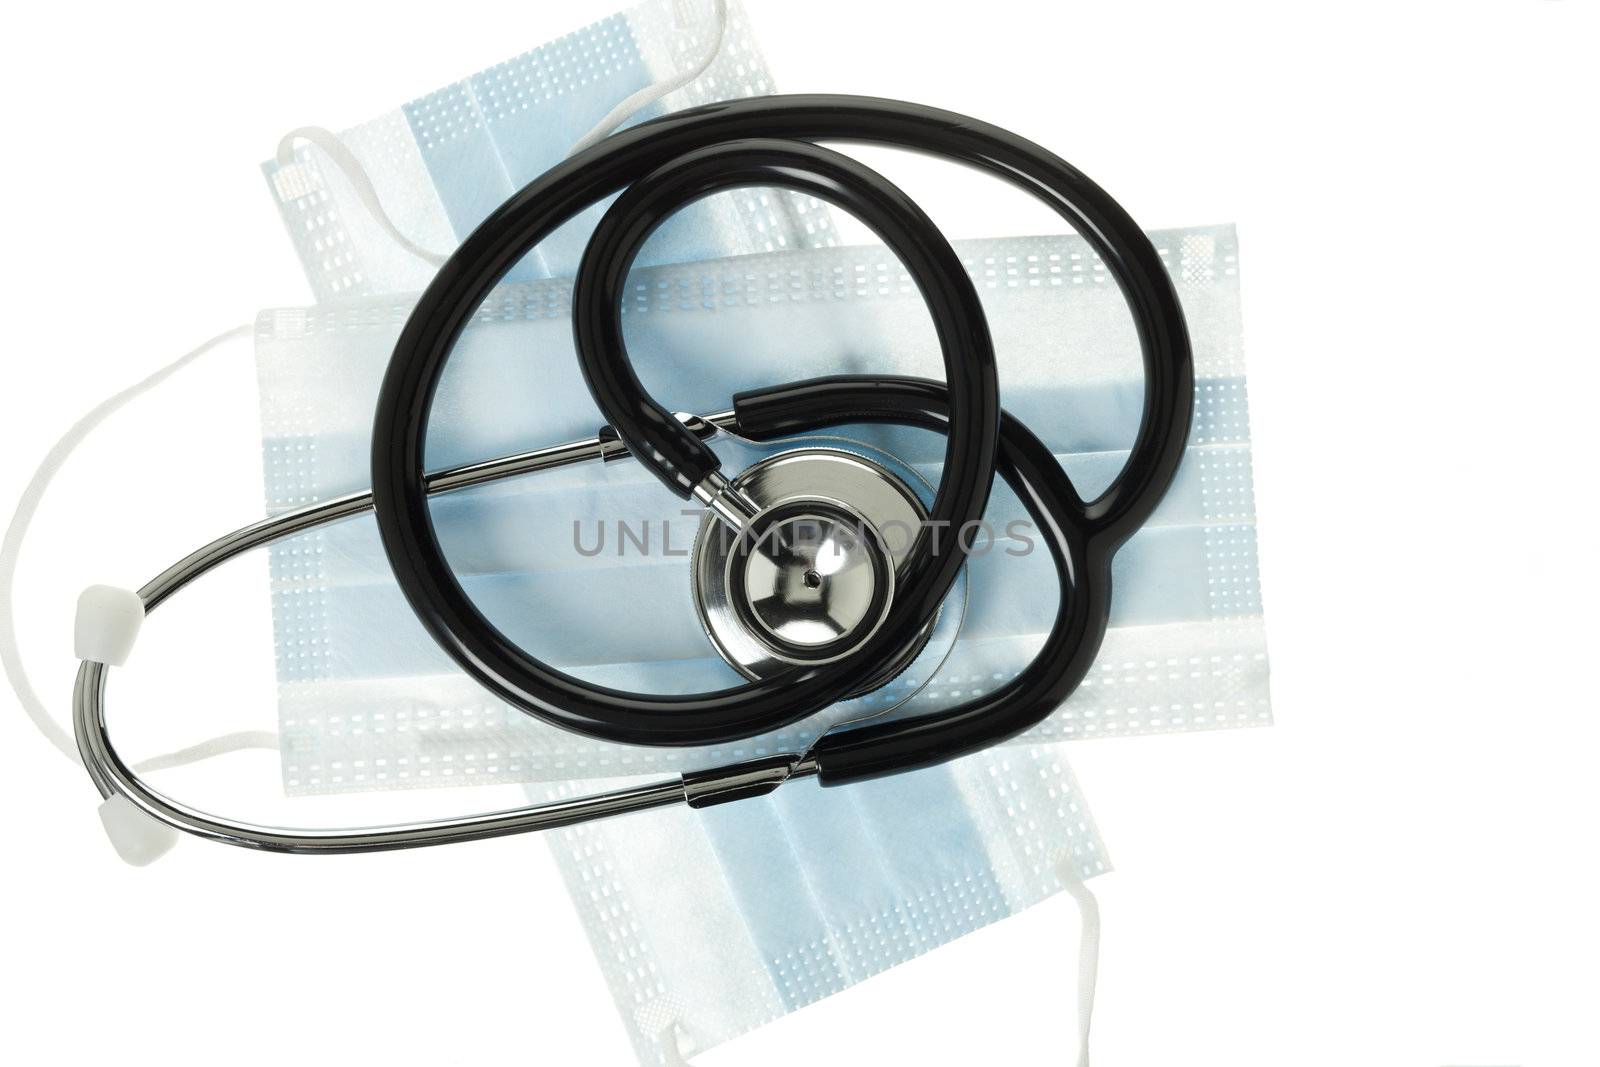 Stethoscope and surgical mask displayed over white.